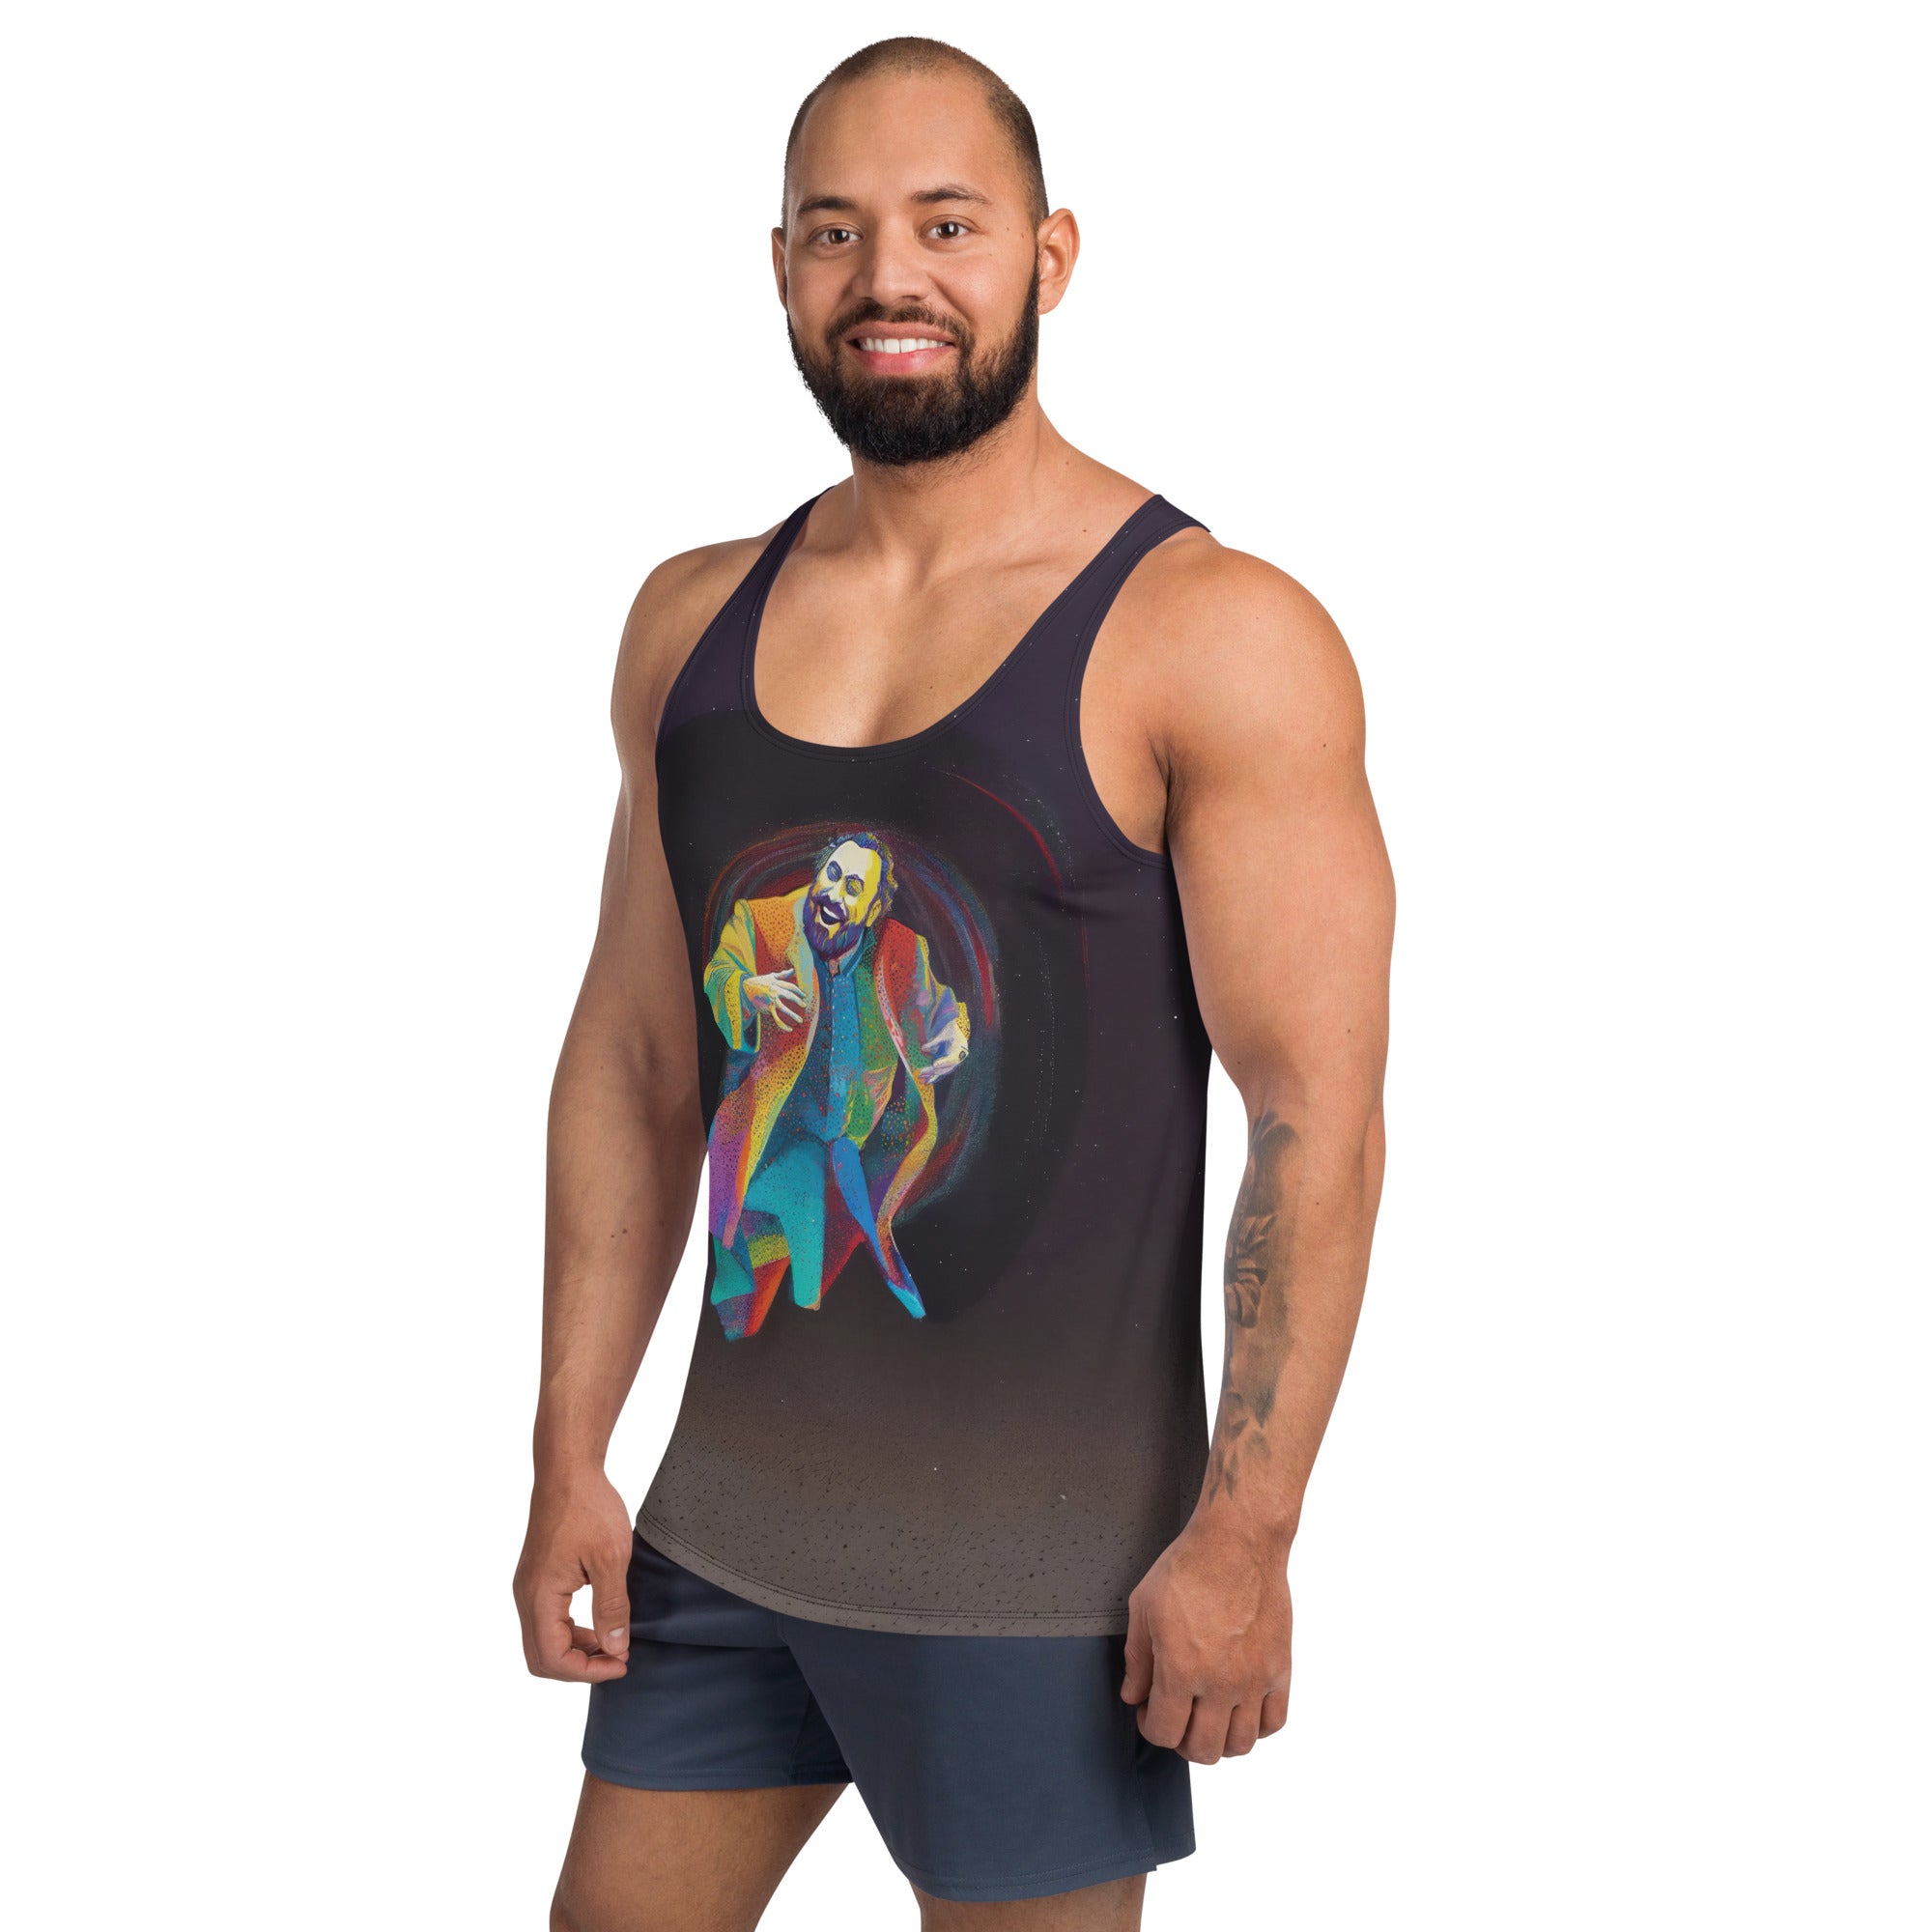 Model wearing the Rainbow Petals Men's Tank Top in a casual setting